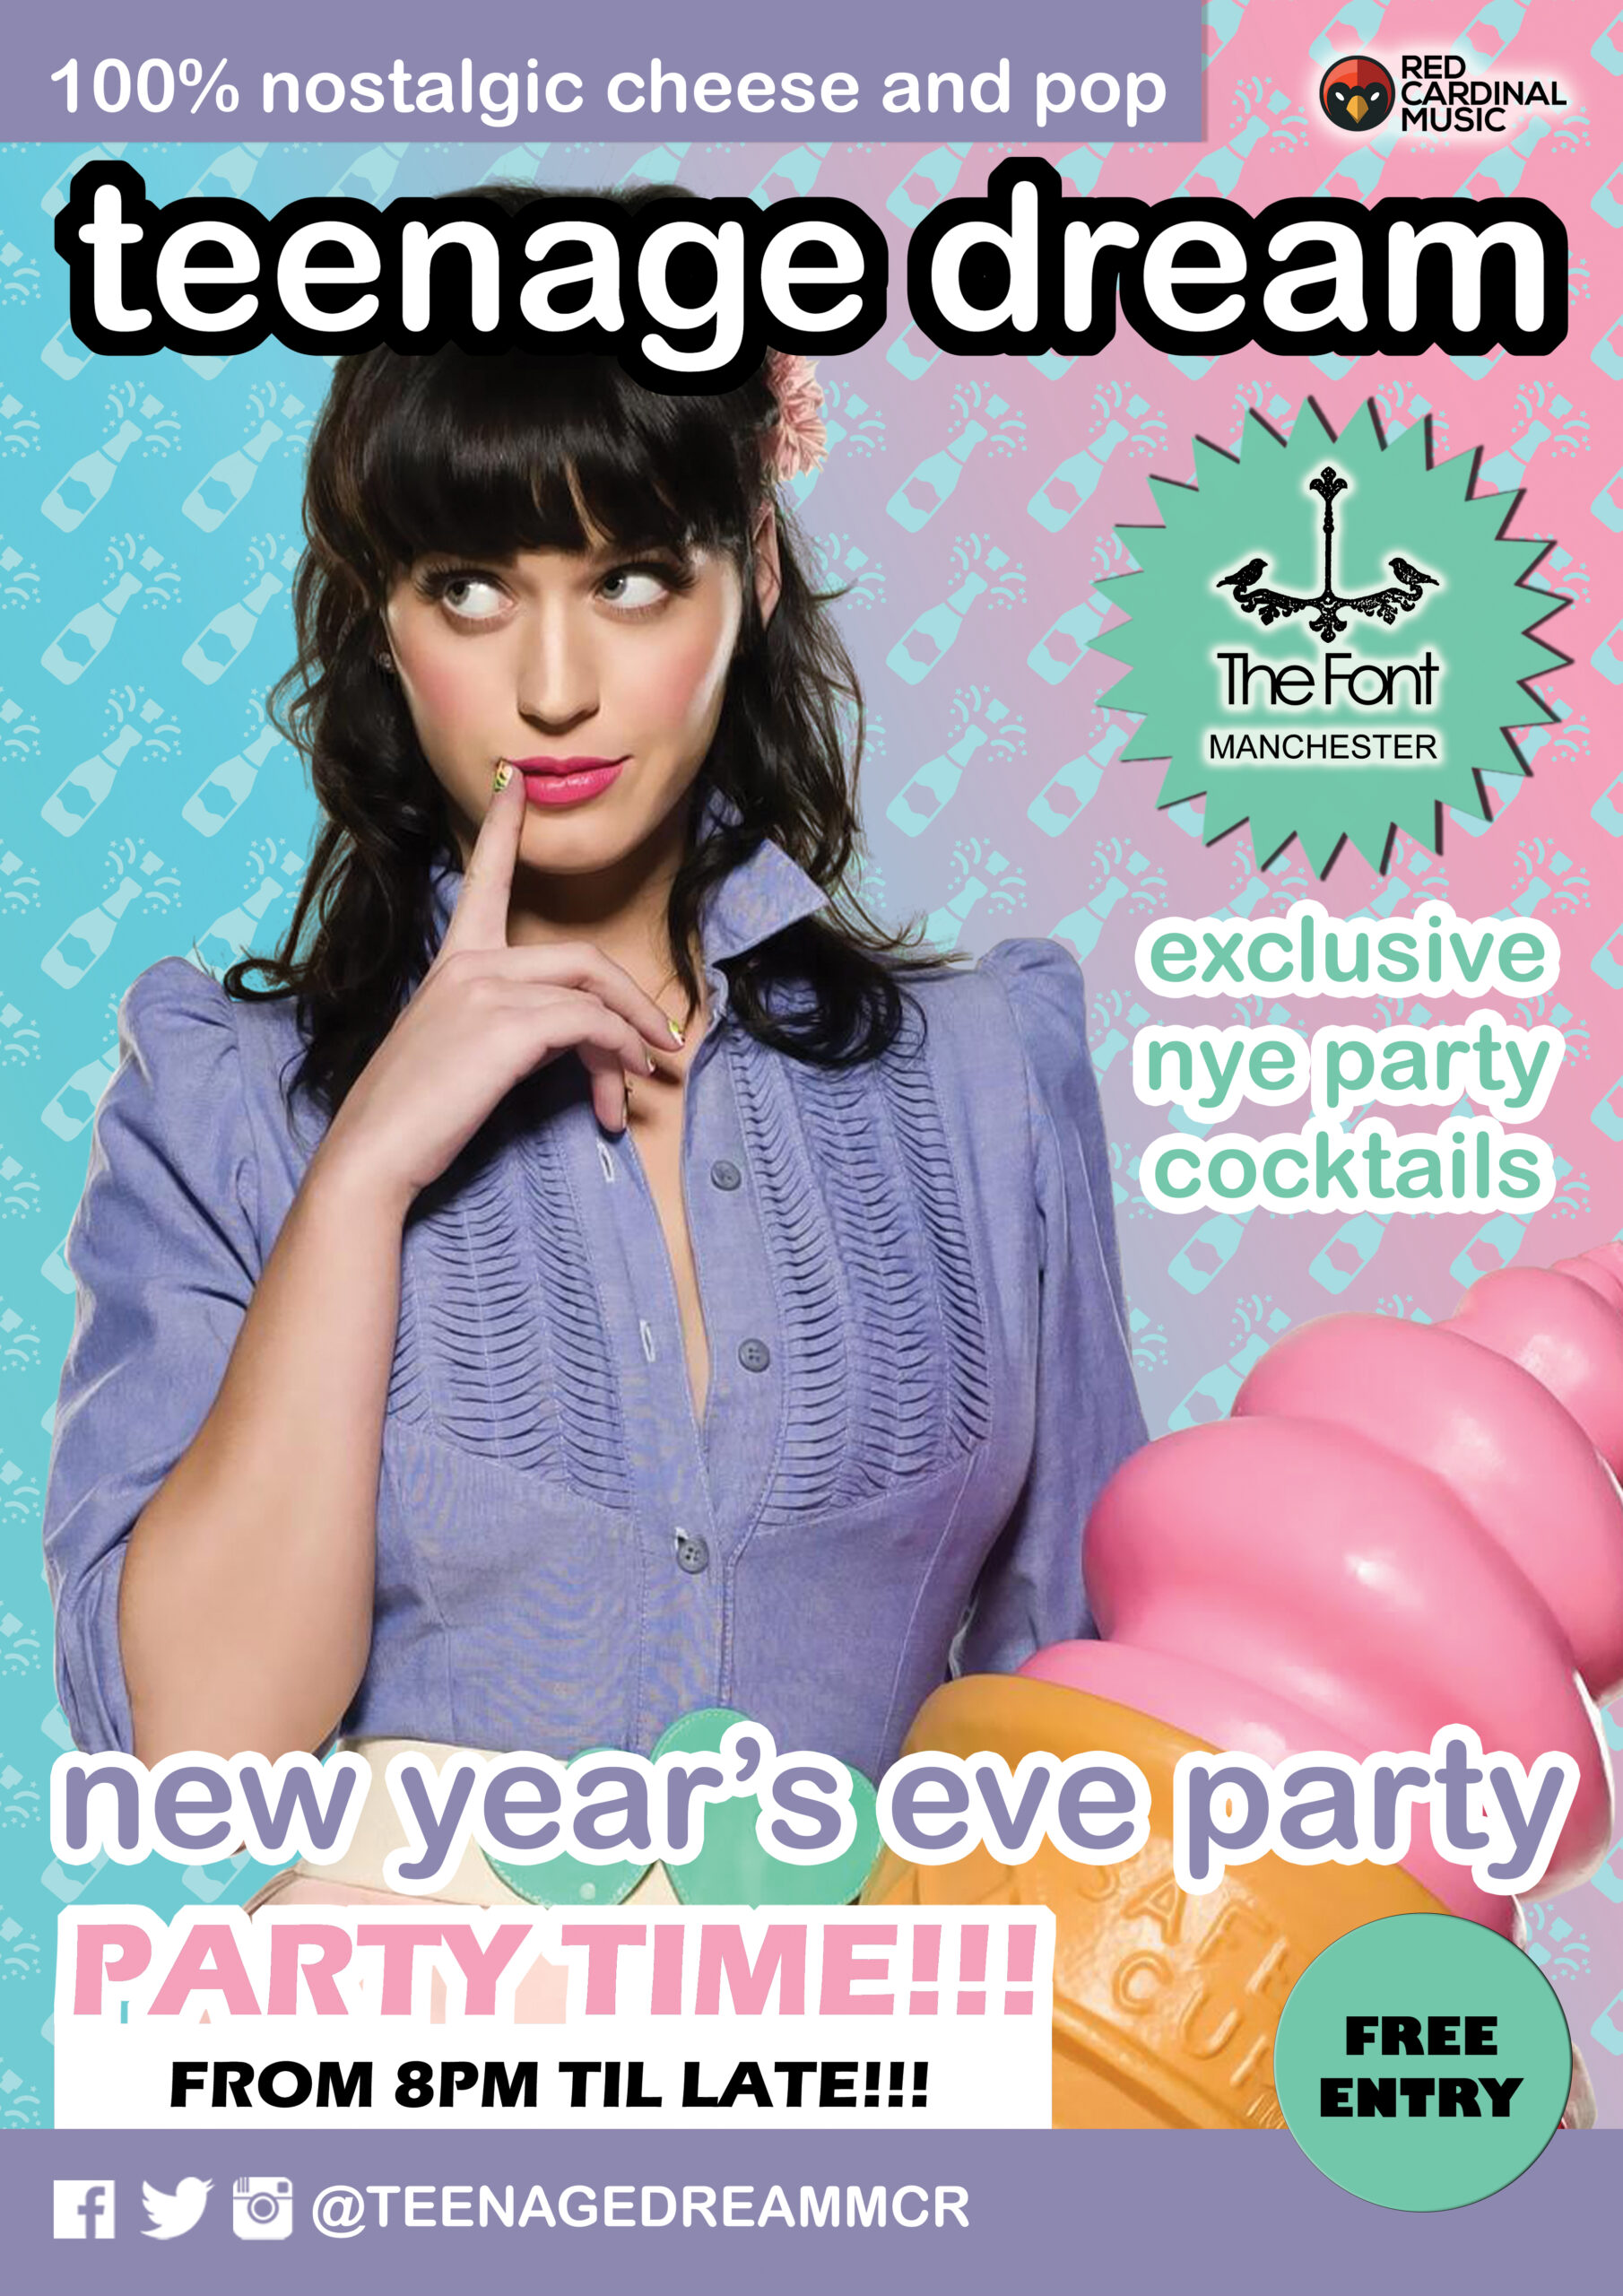 Teenage Dream - NYE 21 - The Font Manchester - Poster - RGB